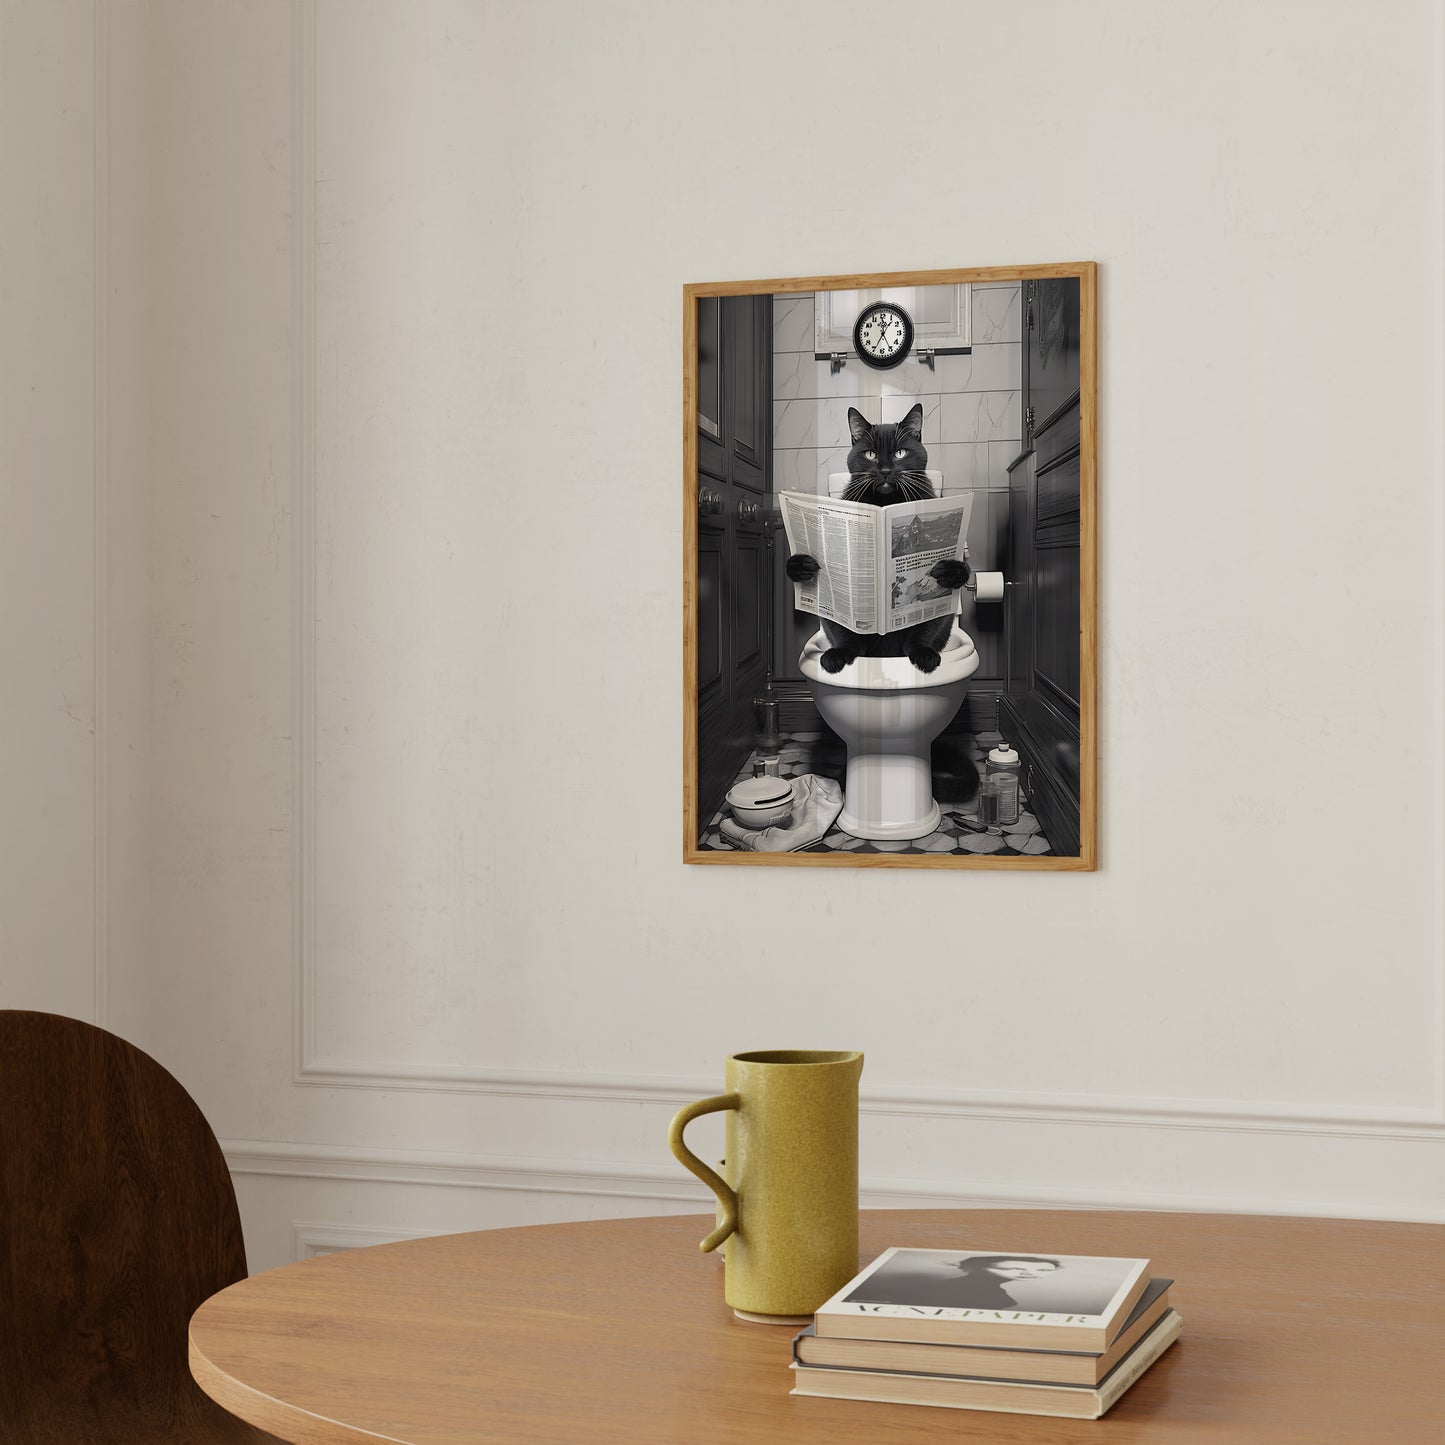 A framed picture of a cat in a bathroom hanging on a wall above a table with a mug and books.